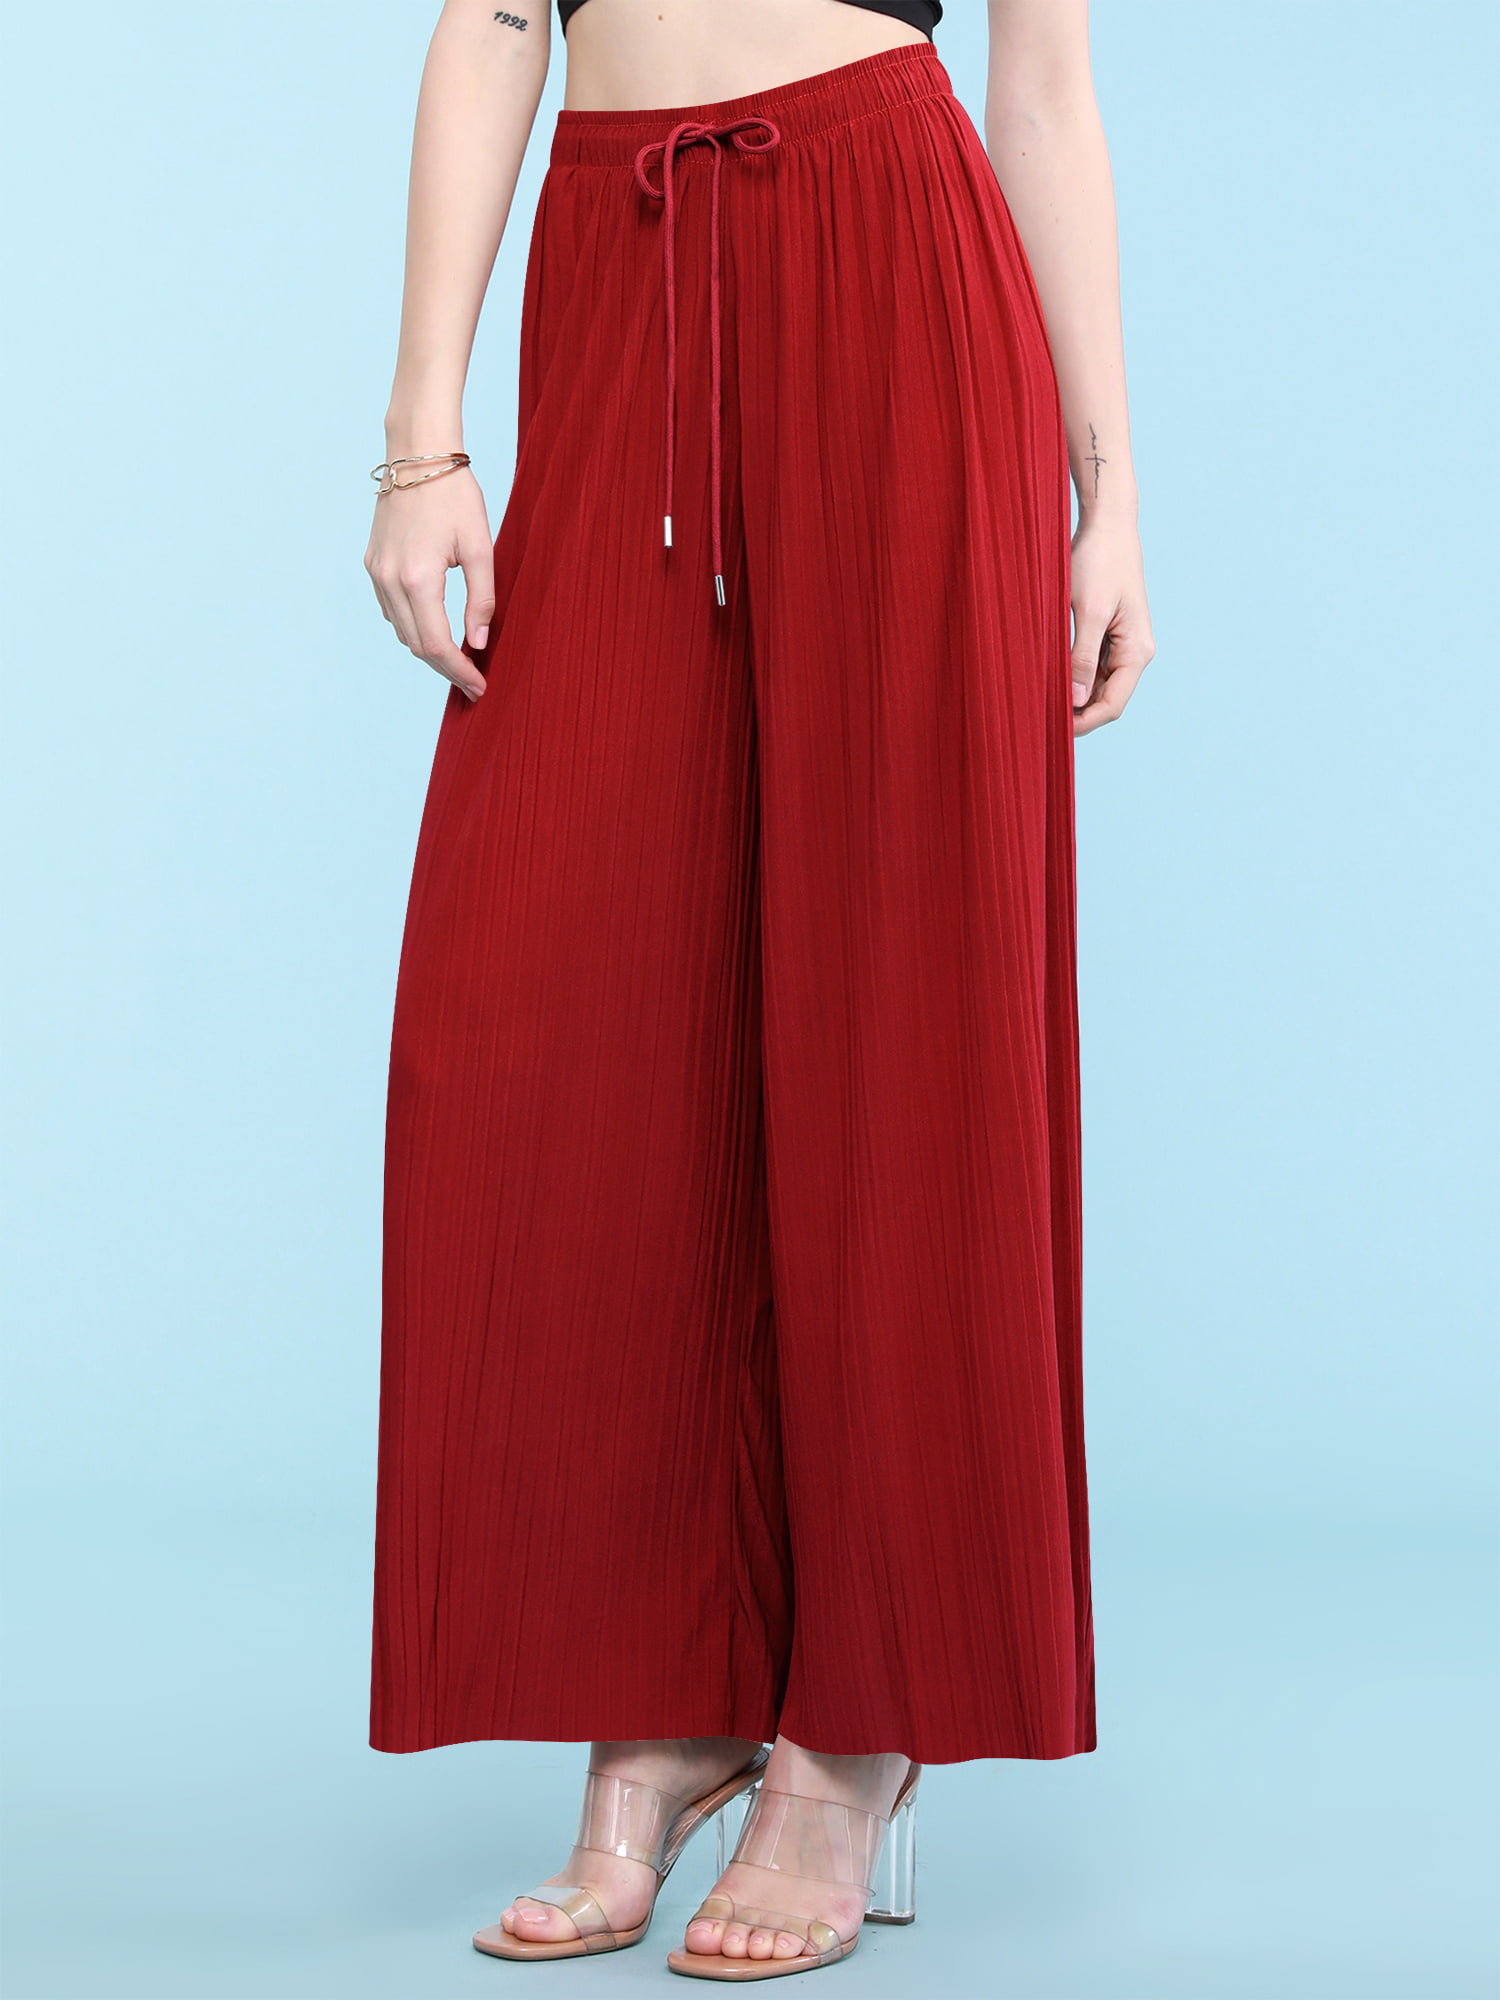 Stunning Red Pleated Pants - All Bottoms